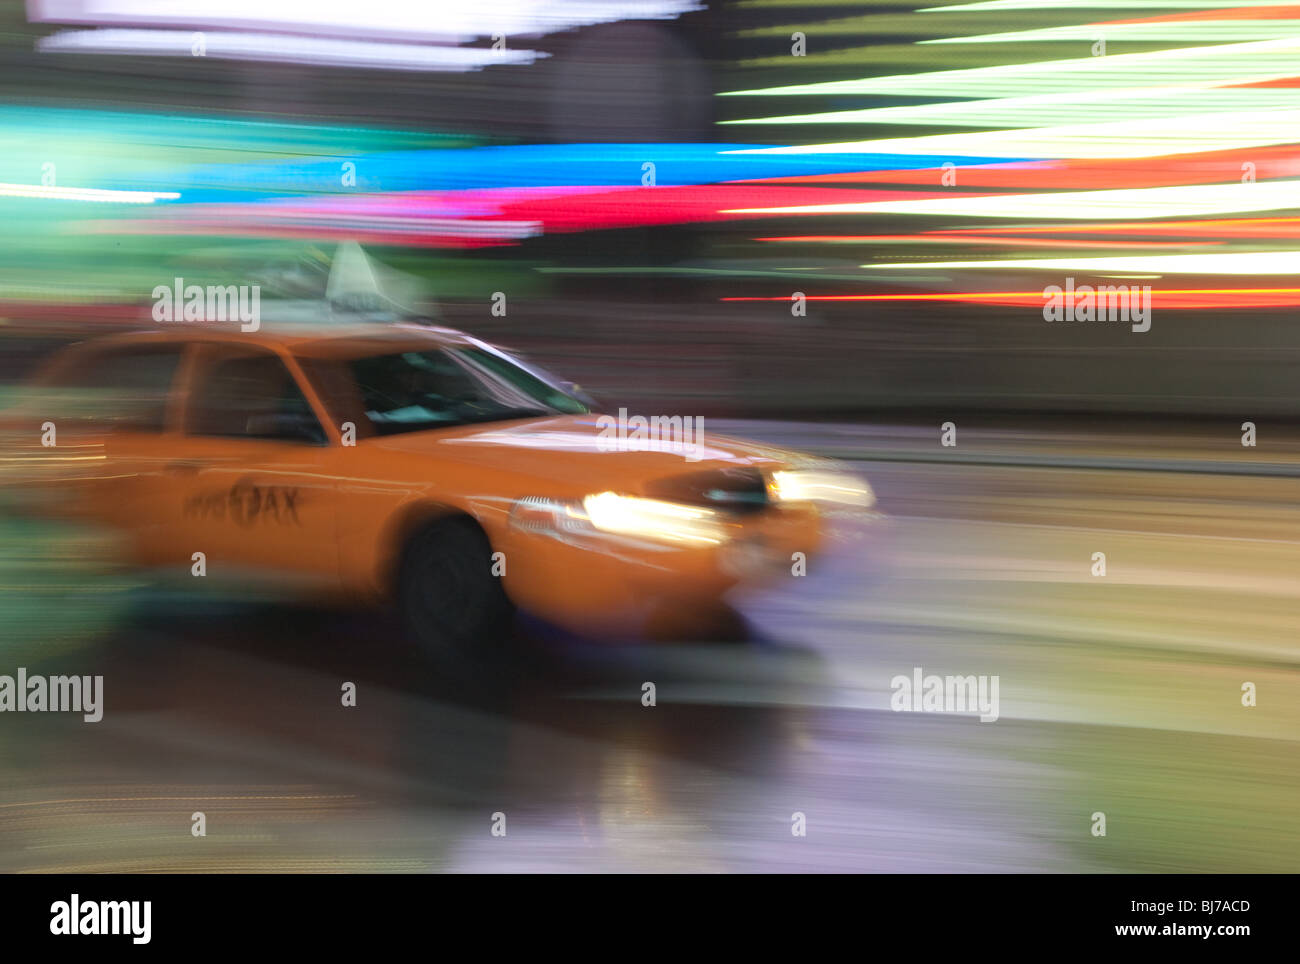 A yellow taxi cab is a blur as it rushes through the lights of Times Square at night in New York City. Stock Photo